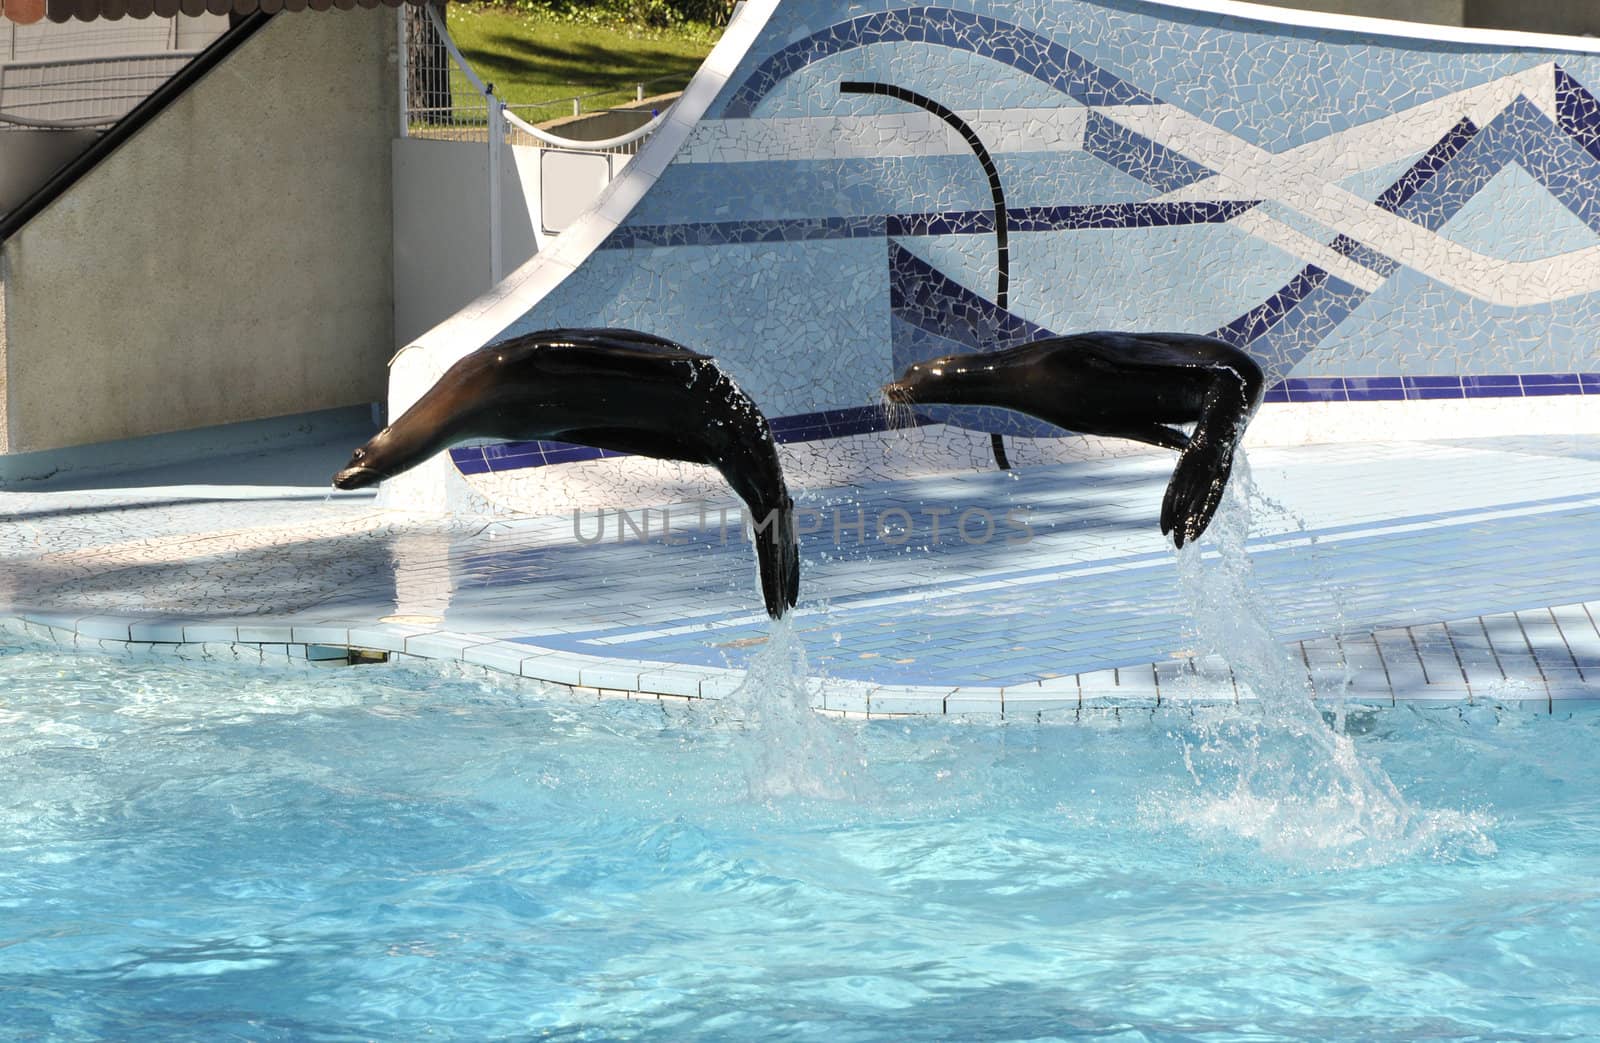 Two Sea Lion Jumping Above a Zoo Pool by shkyo30